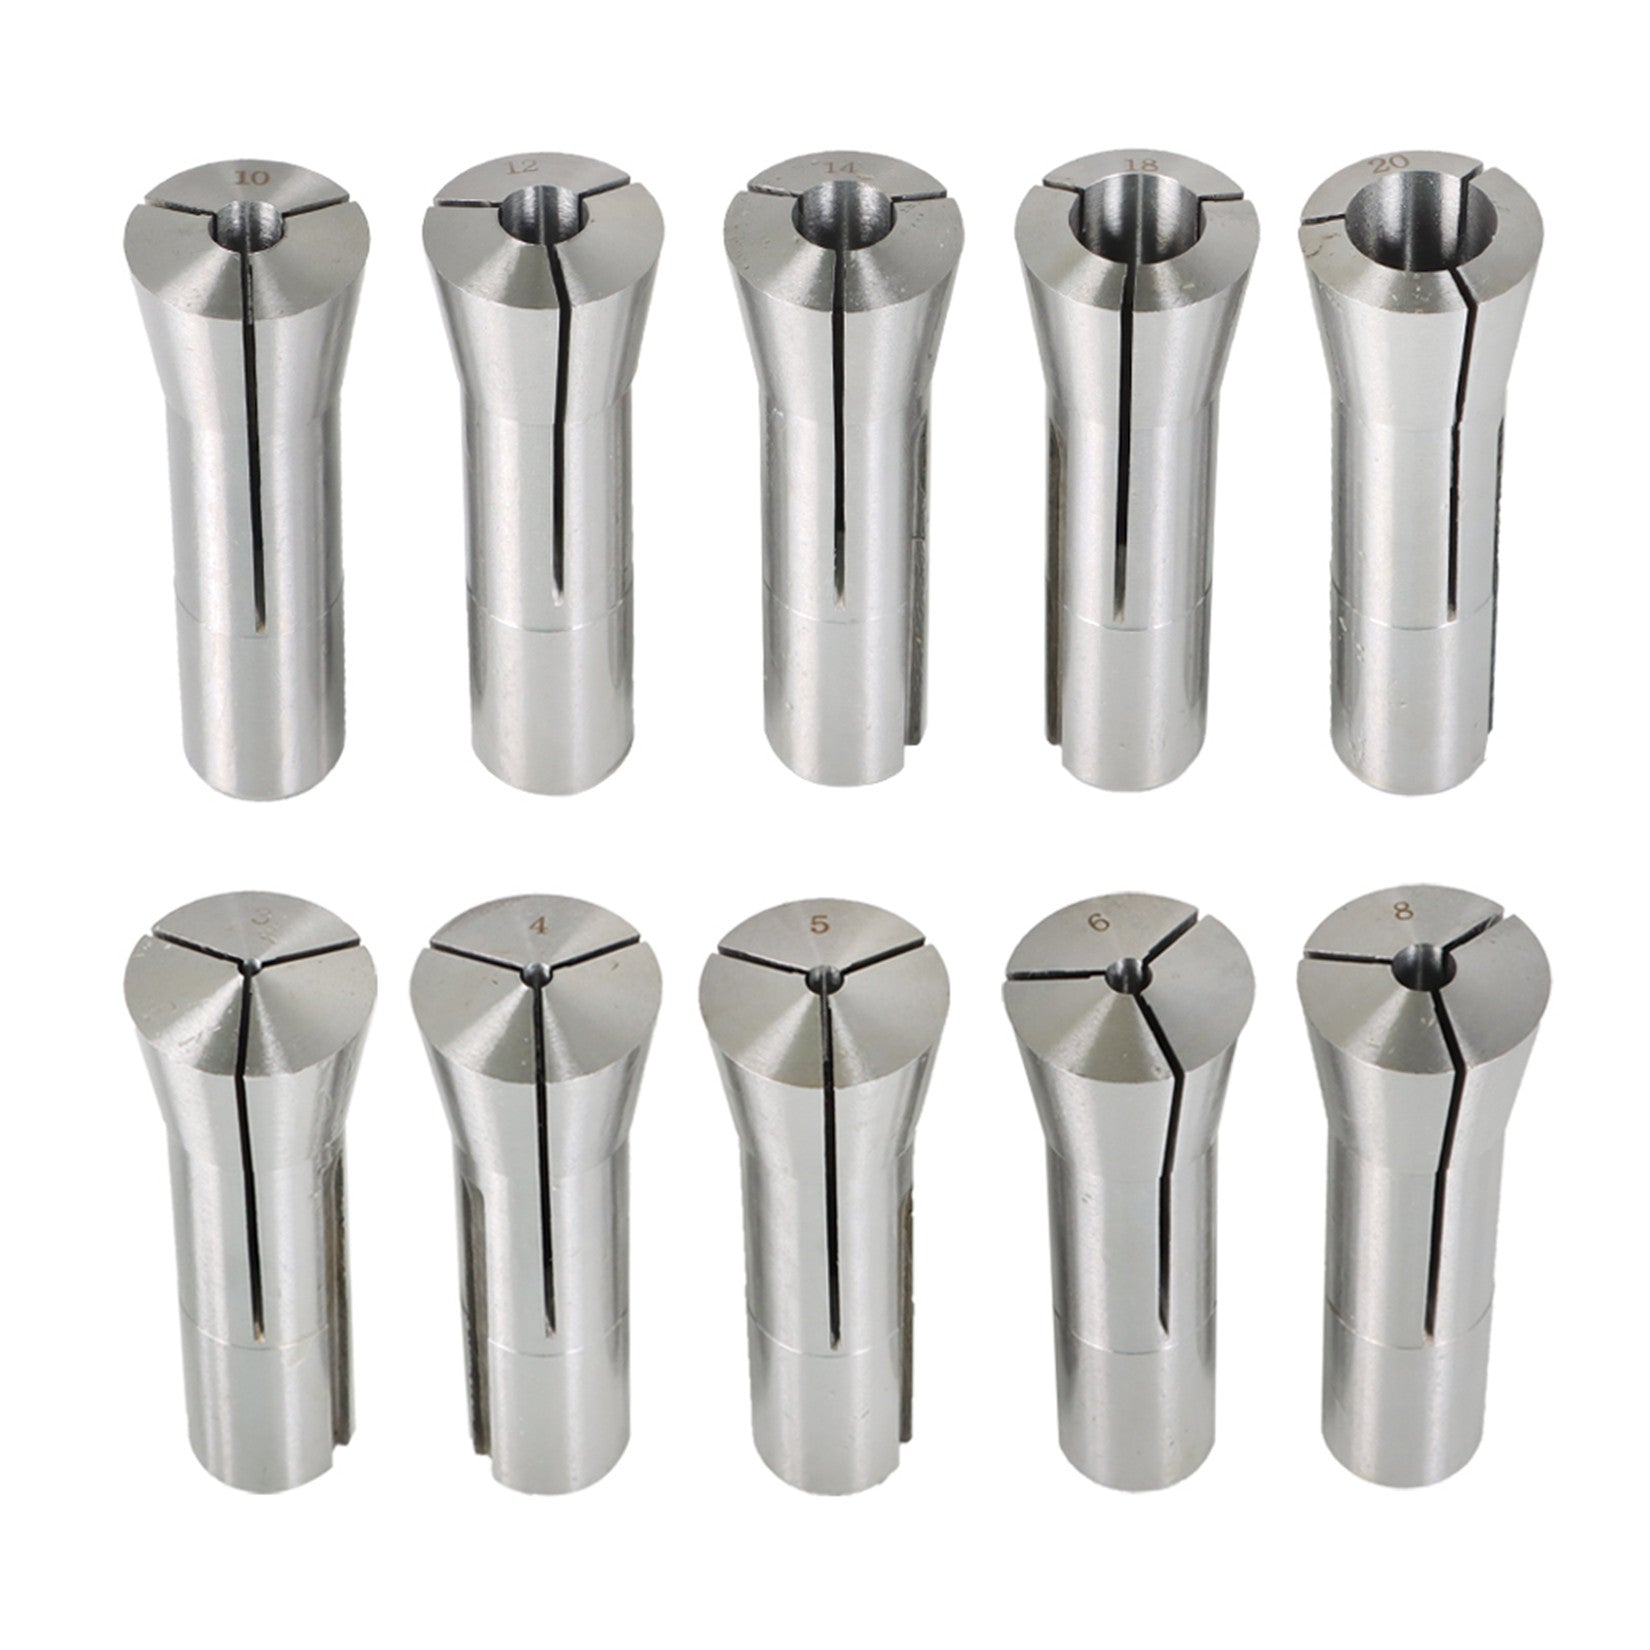 findmall ER8 Collet Set 10Pcs ER8 Collet Chuck Spring Collet Set CNC Engraving Milling Lathe Chuck Tool 3-20MM Fit for CNC Engraving Machine and Milling Lathe Tool FINDMALLPARTS